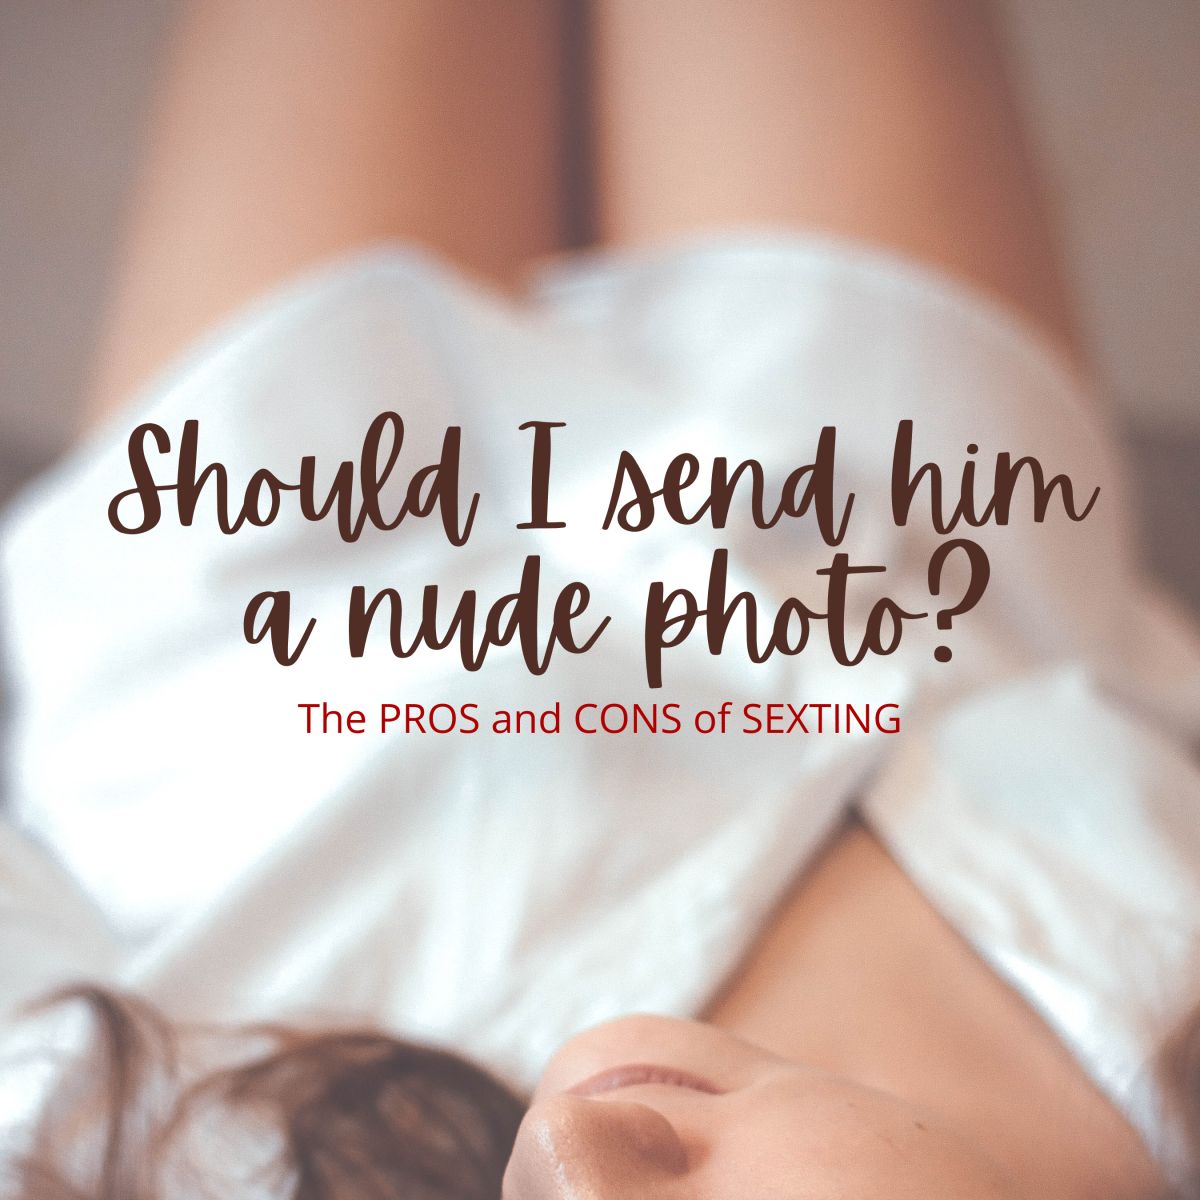 The pros and cons of sending nude photos.